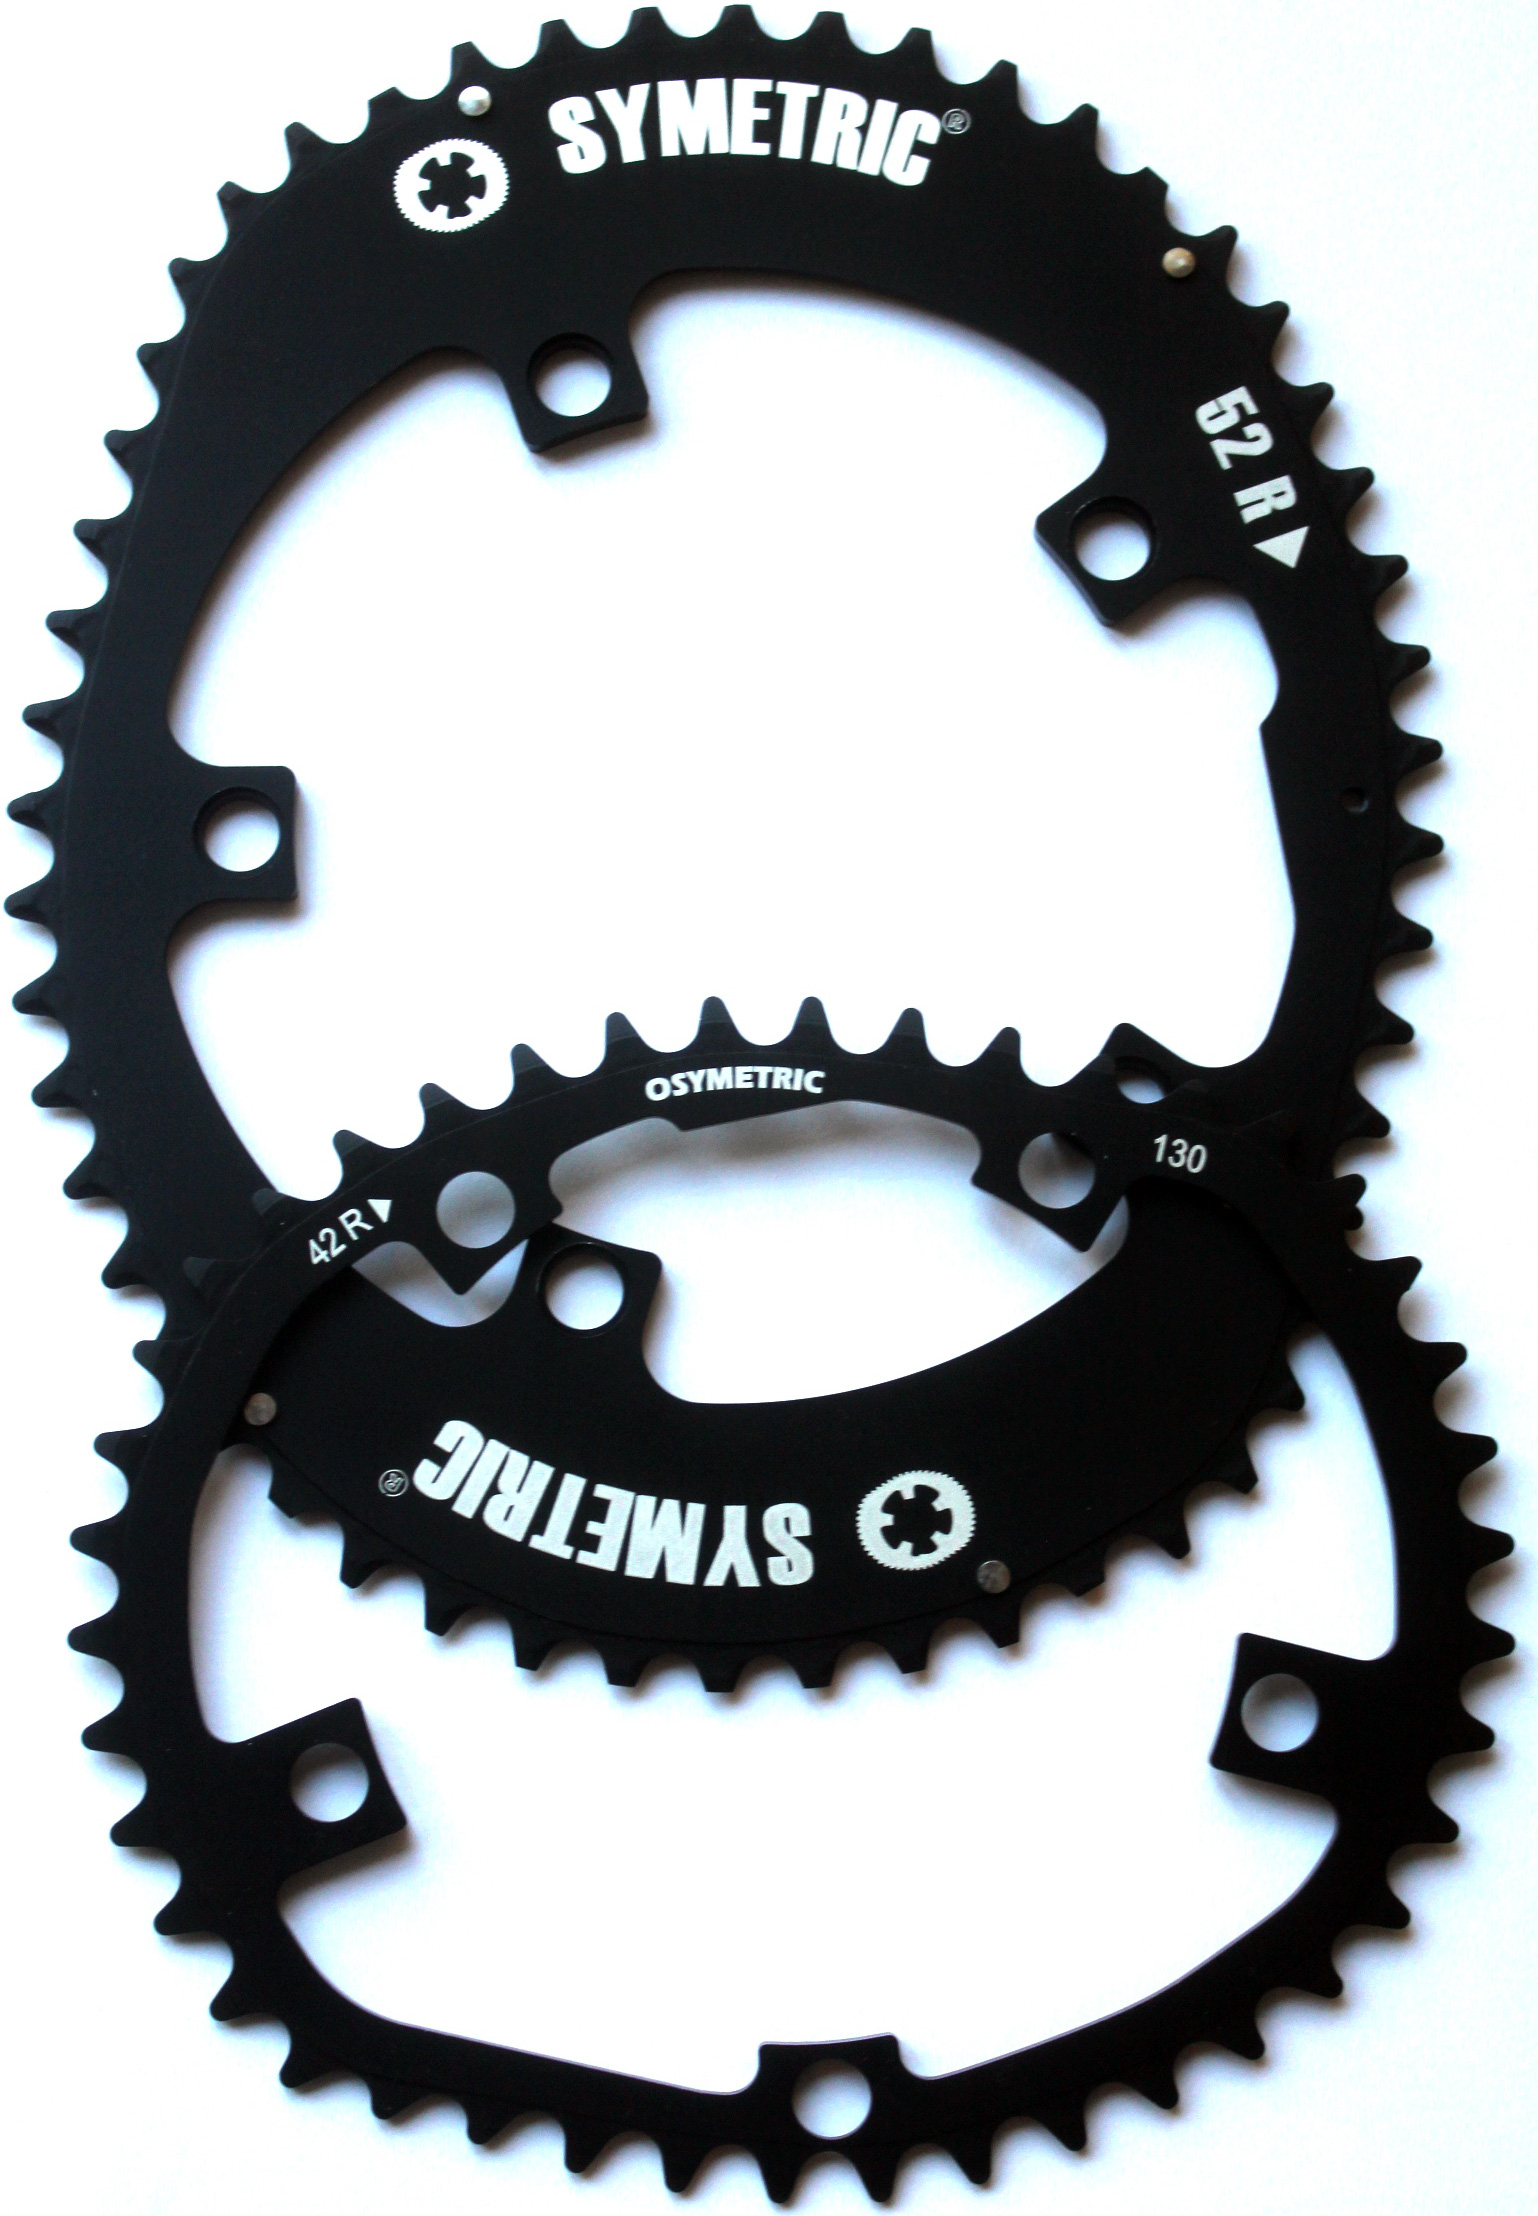 OS135C 44/54T Osymetric 5-Arm/135mm Campag Chainring Kit